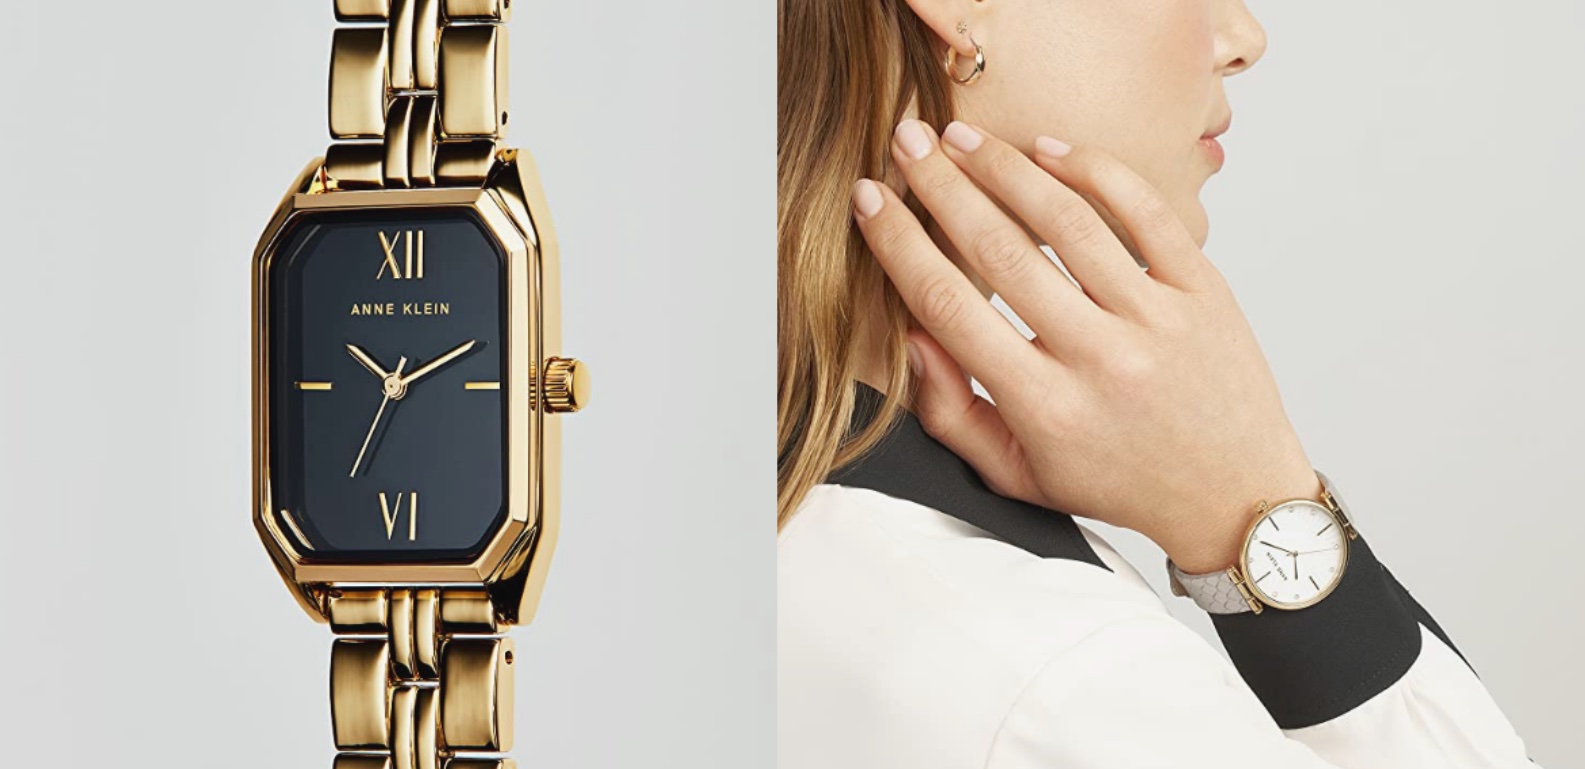 takes up to 60% off Anne Klein Watches and accessories from $26  shipped